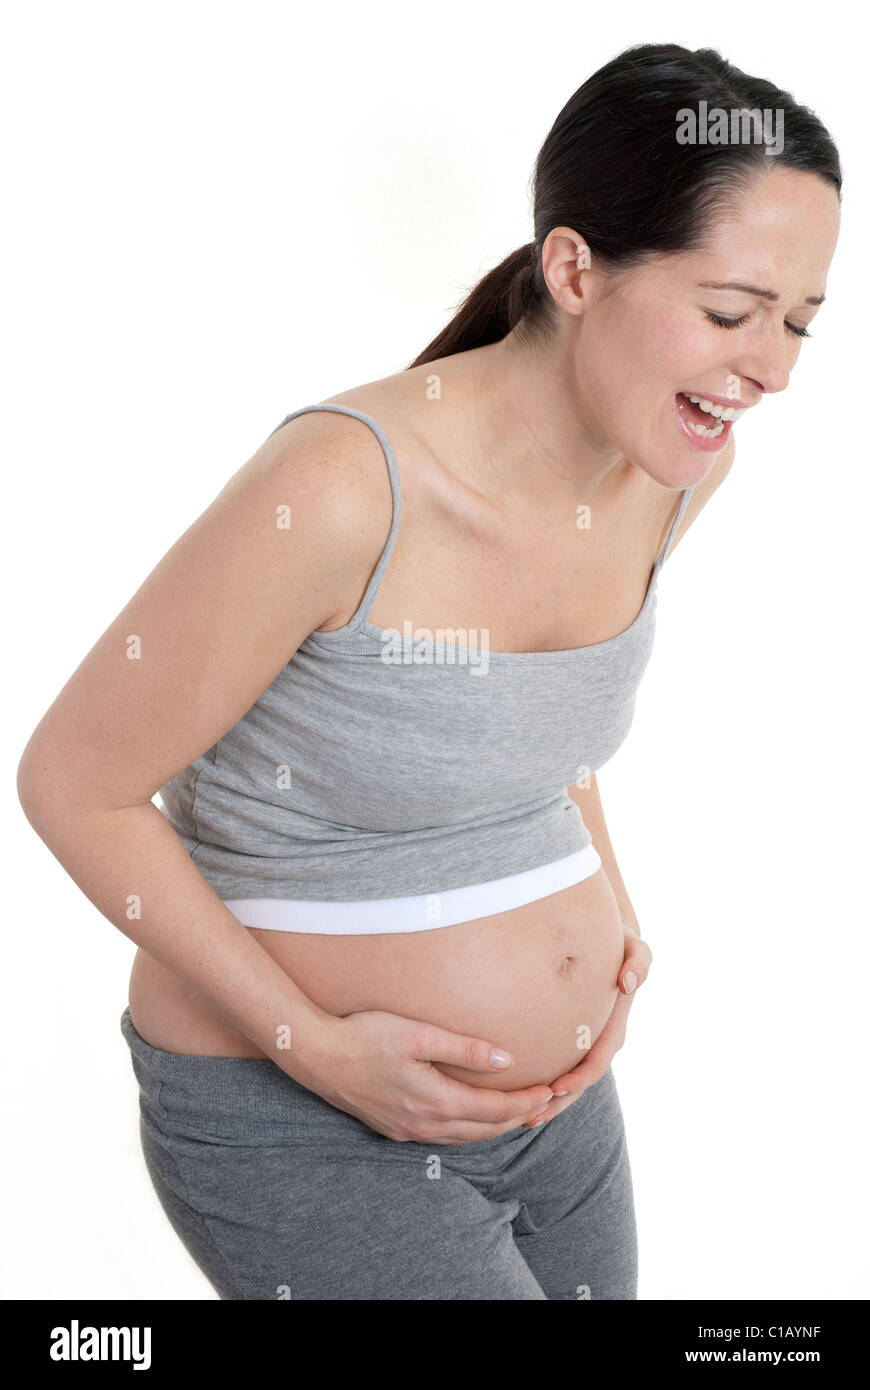 Pregnant woman in pain Stock Photo